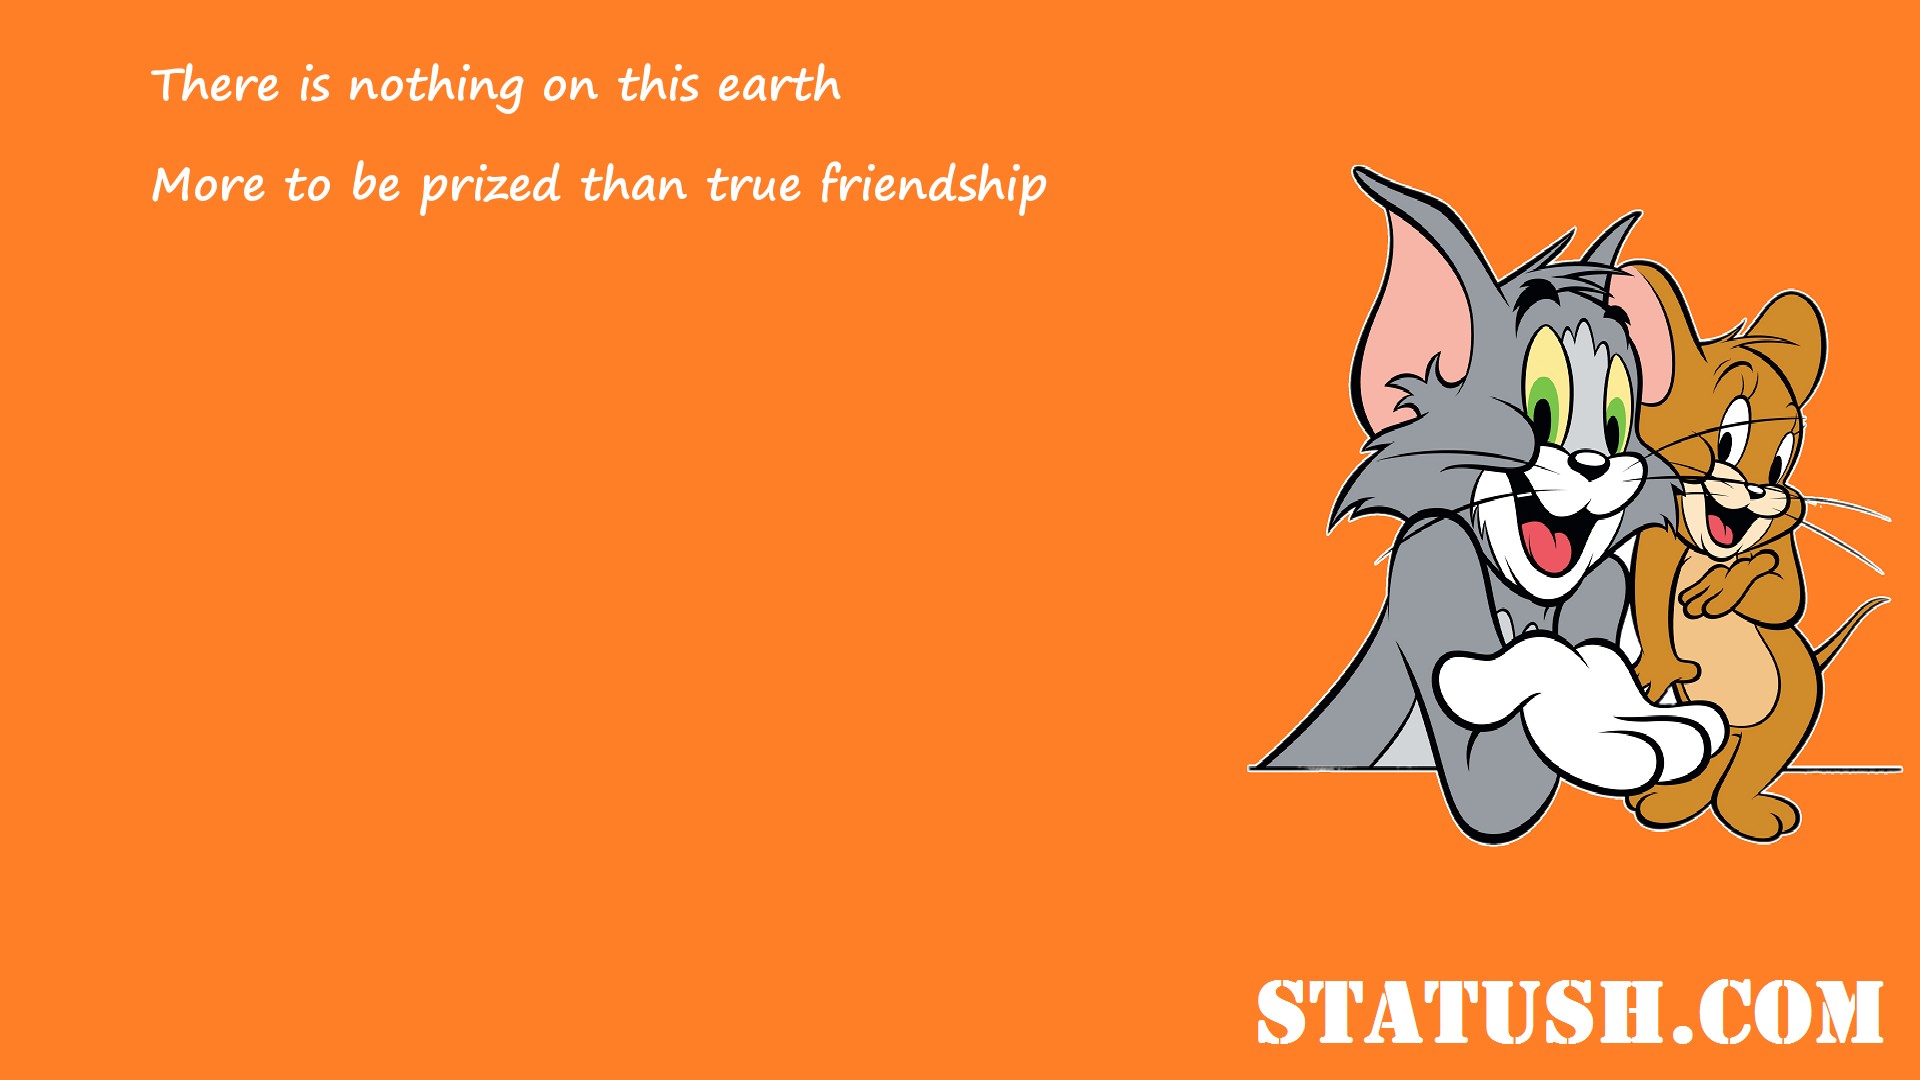 There is nothing on this earth more to be prized than true friendship - Friendship Quotes at statush.com